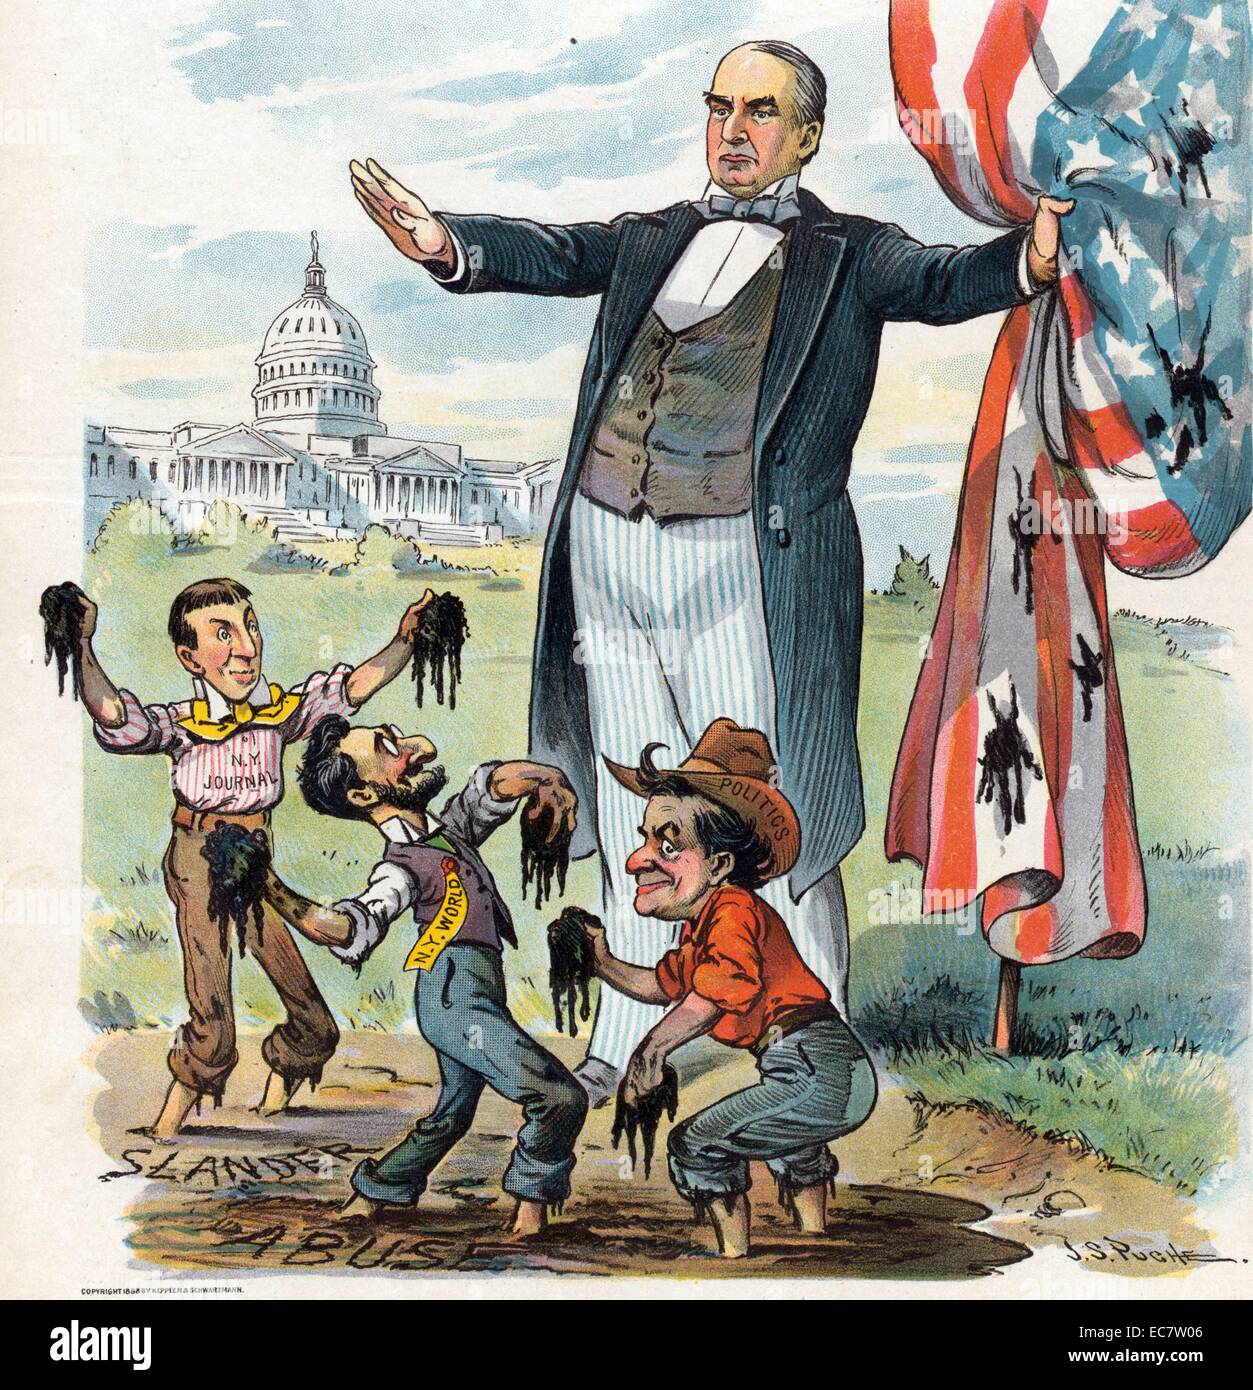 Anything for a scandal' President William McKinley (1843-1901) standing at the edge of a mudhole labelled 'Slander' and 'Abuse', holding a mud-splattered American flag in his left hand. Three figures are throwing mud, they are William Jennings Bryan, Joseph Pulitzer labelled 'N.Y. World', and William Randolph Hearst labelled 'N.Y. Journal'. The U.S. Capitol is in the background. Stock Photo